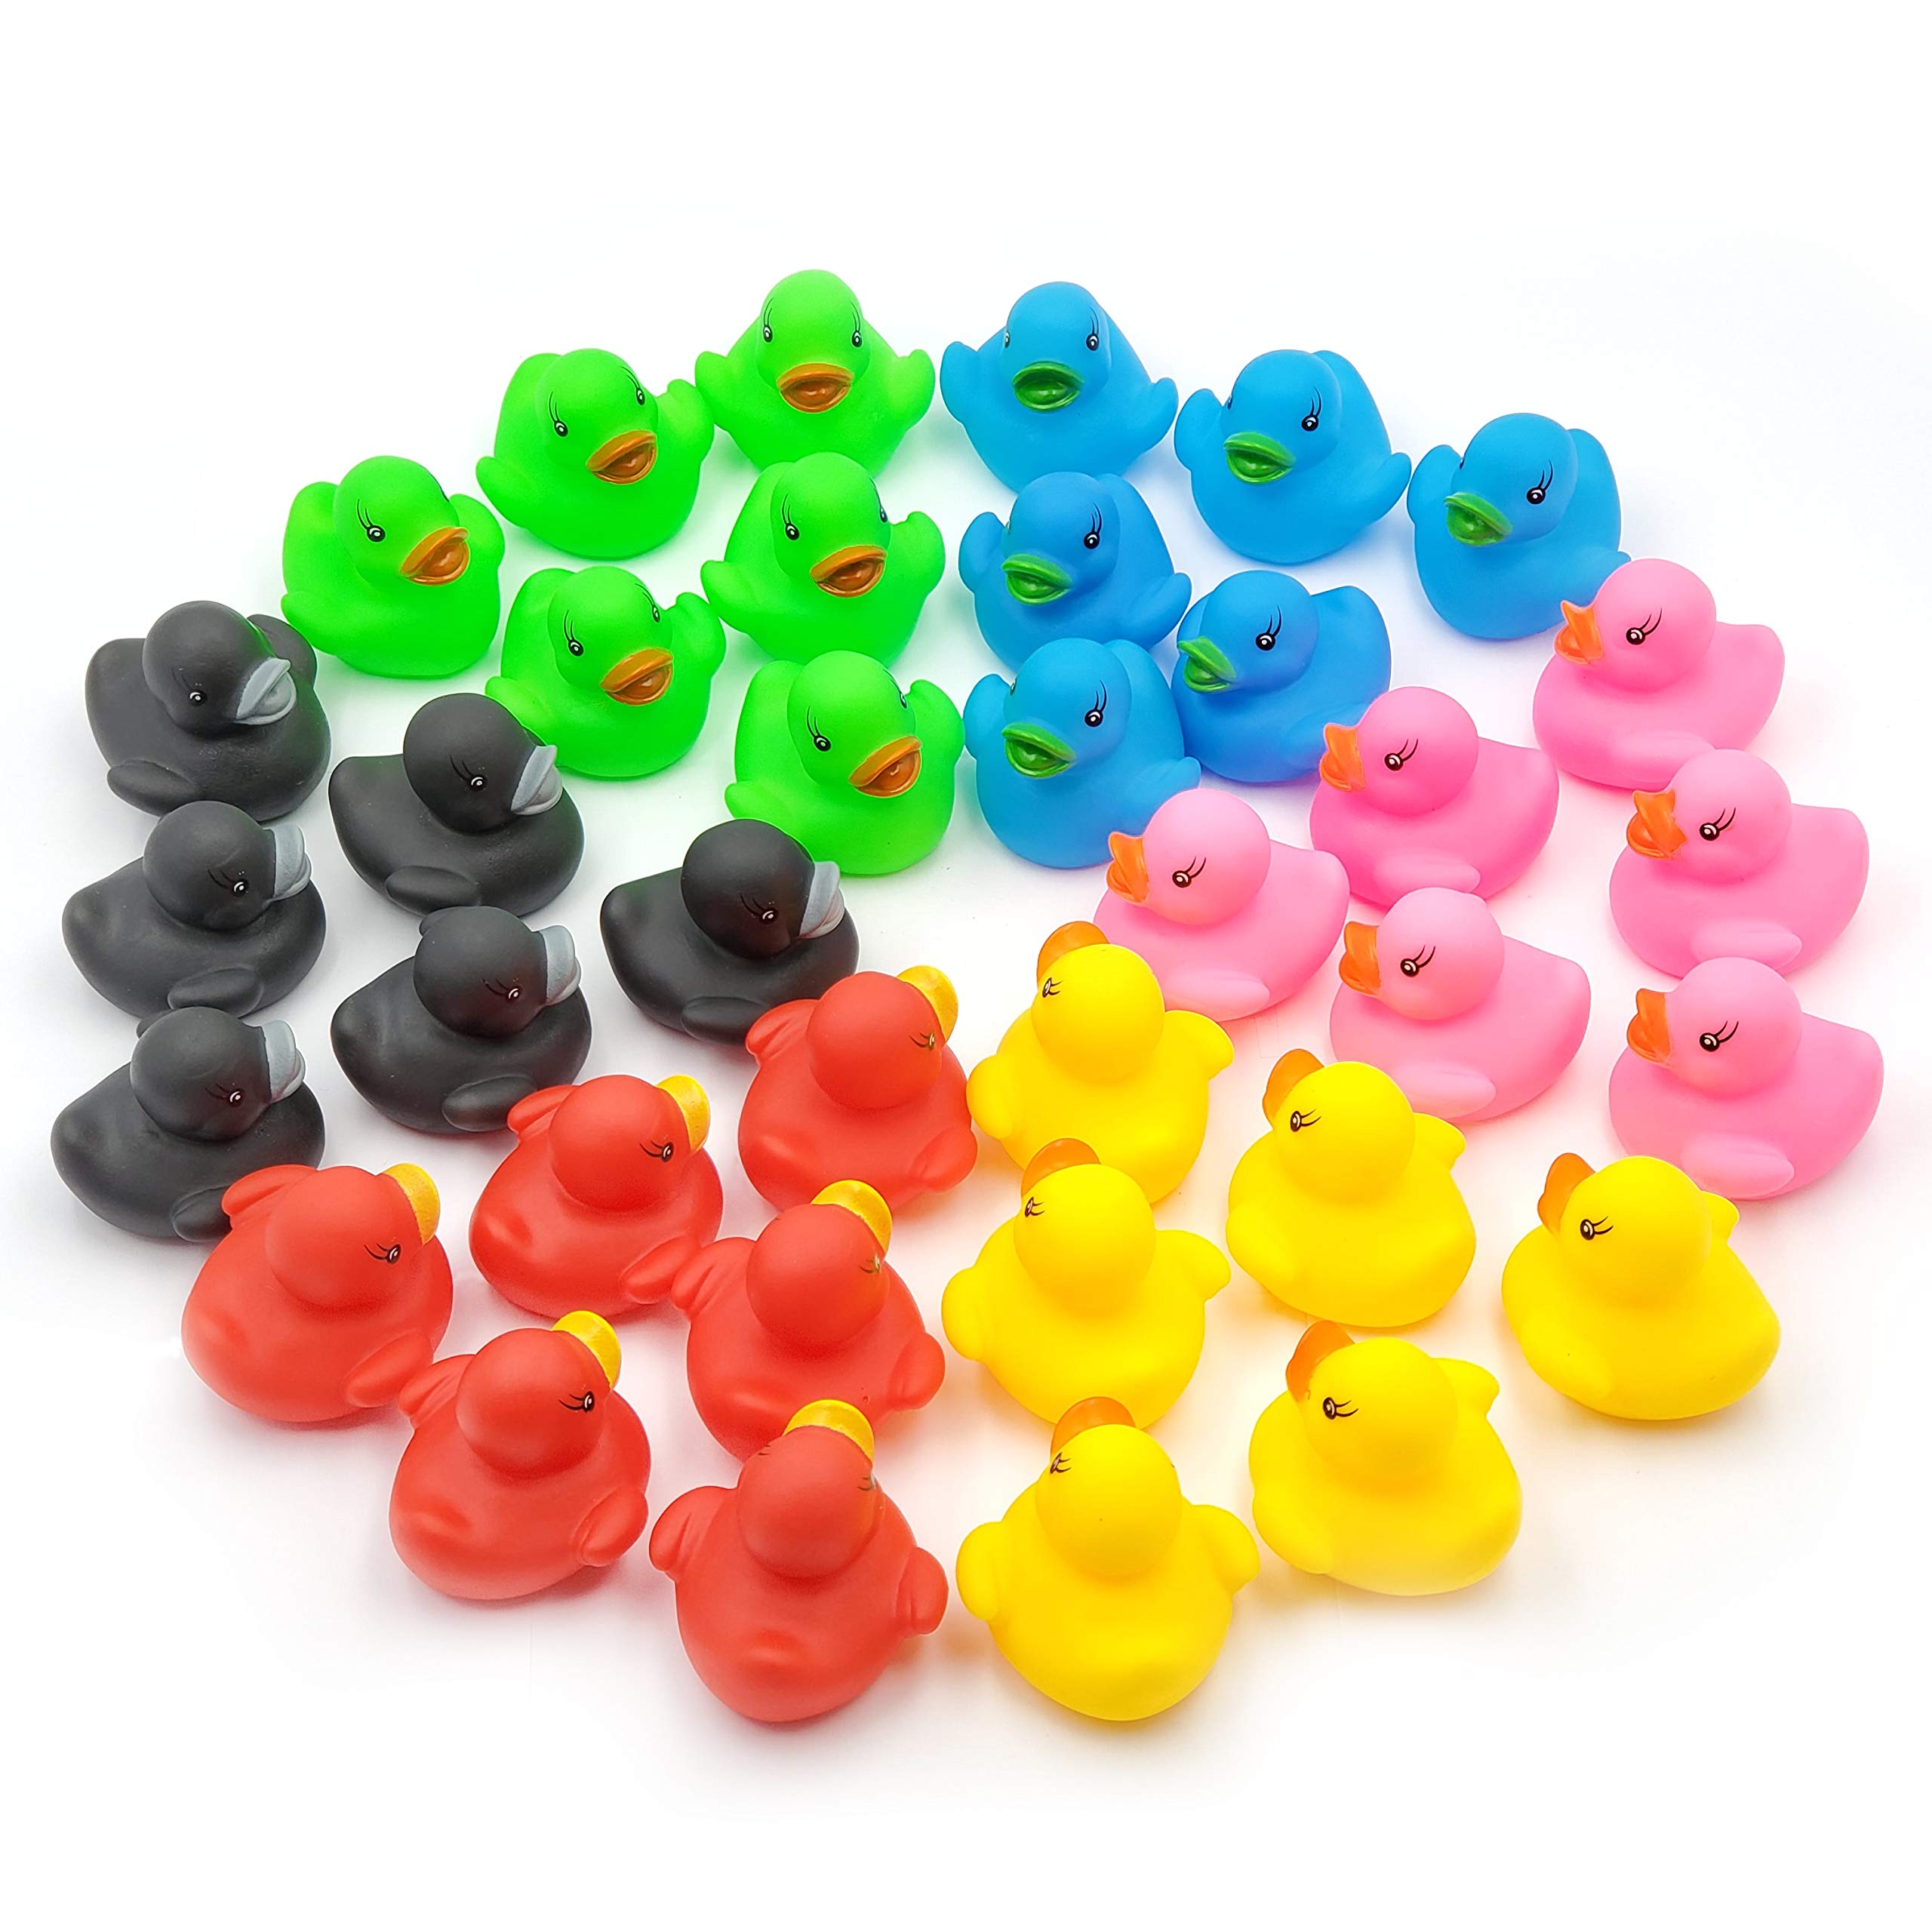 Classic Rubber Duck Toy Duckies for Kids, Six Solid Colors, Bath Birthday Gifts Baby Showers Classroom Summer Beach and Pool Activity, 2" (12-Pack)